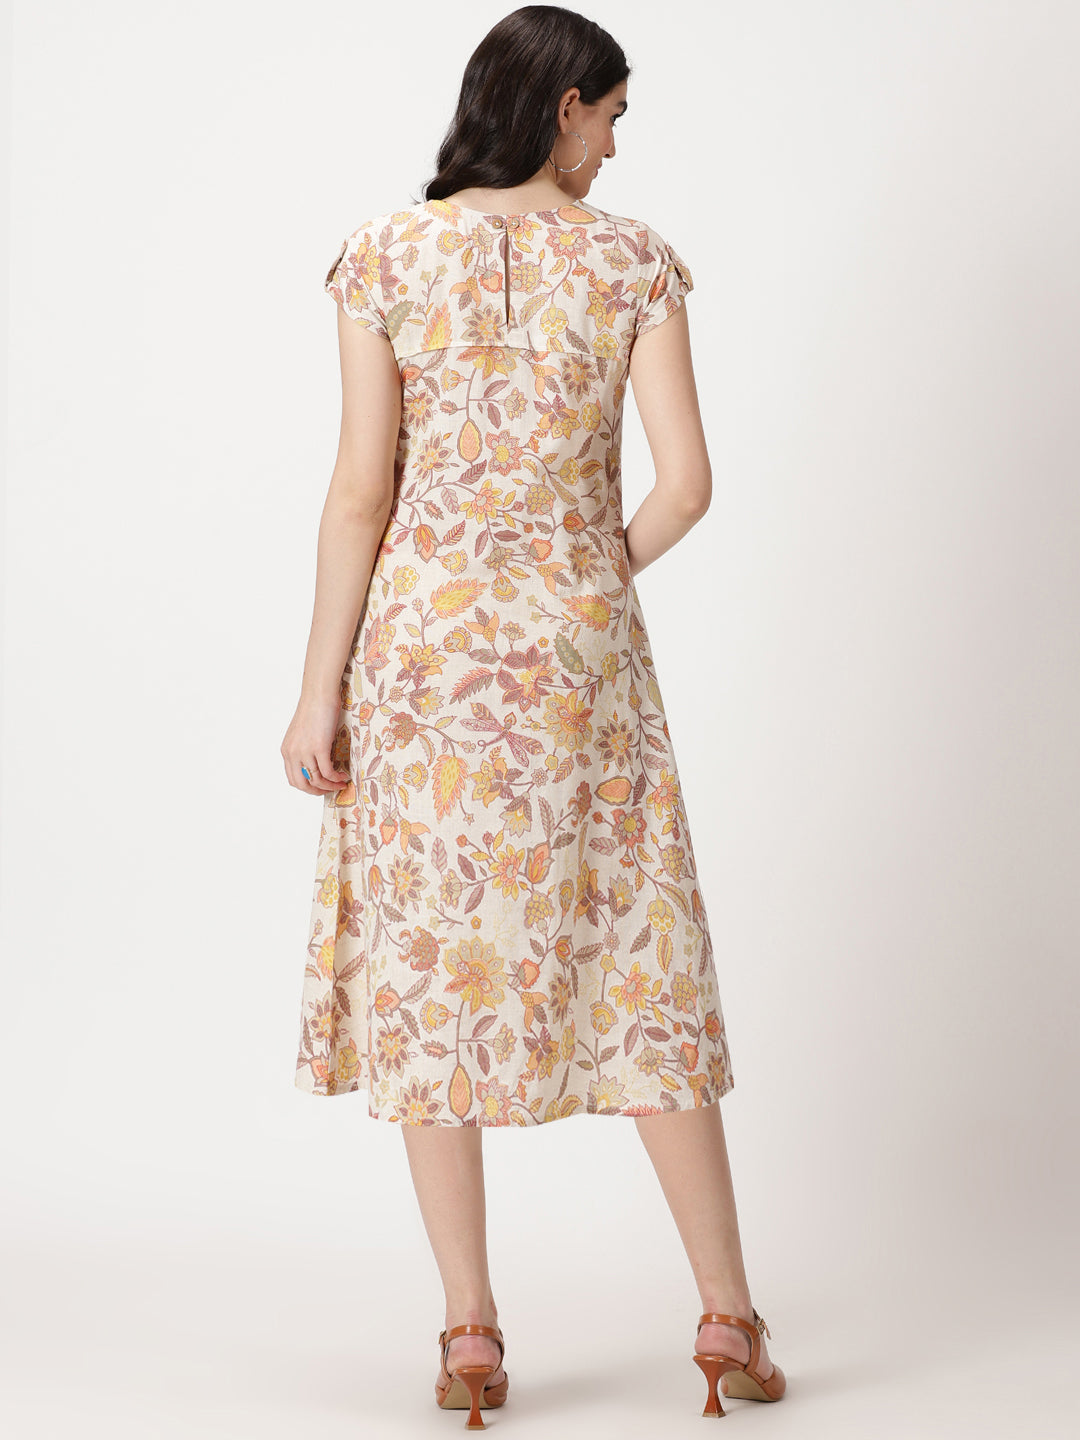 Off White-Yellow Ethnic Floral Print Midi Dress with Patch Pockets